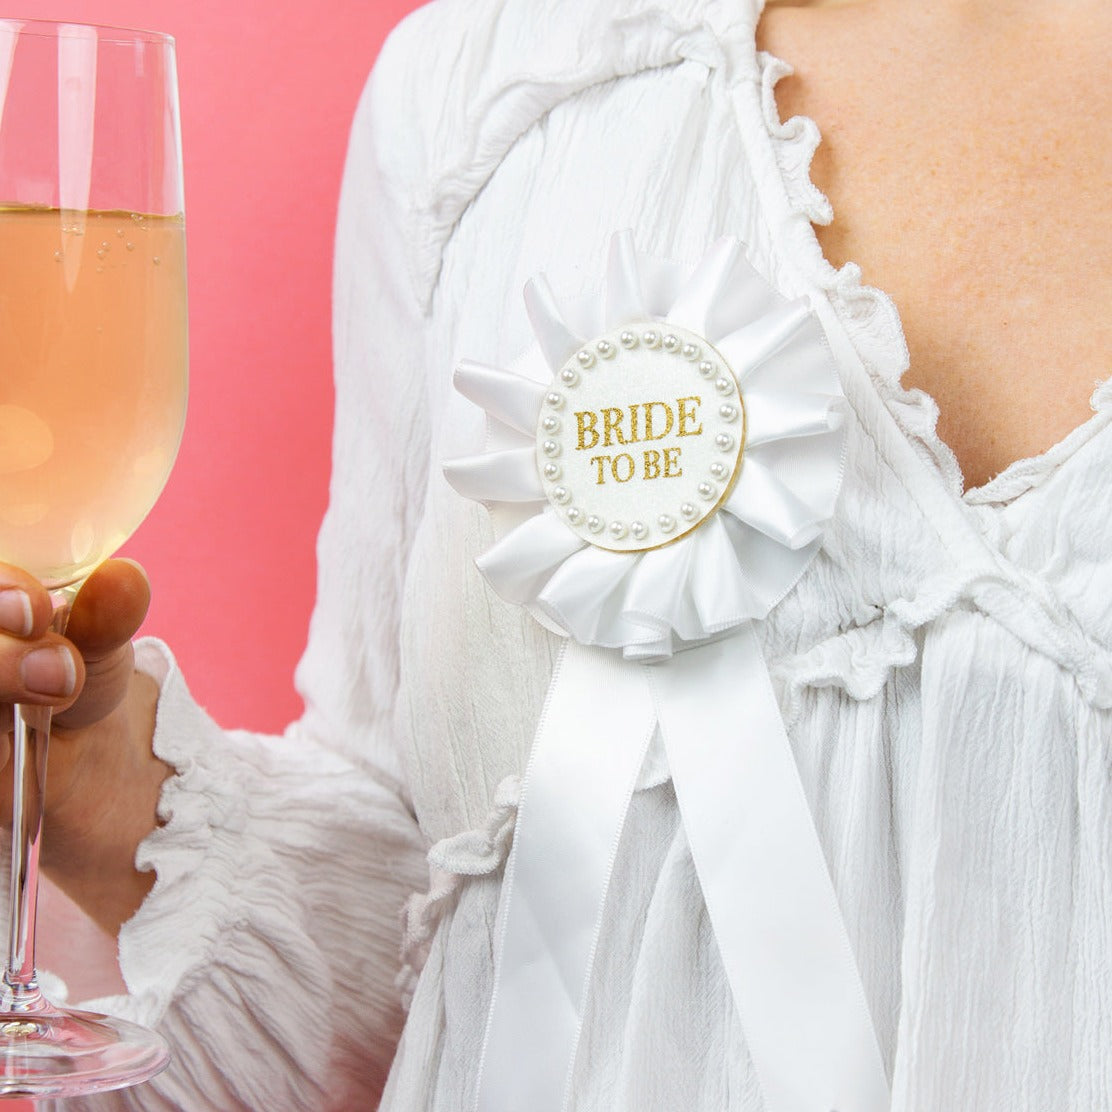 Bride To Be Bachelorette Party Badge